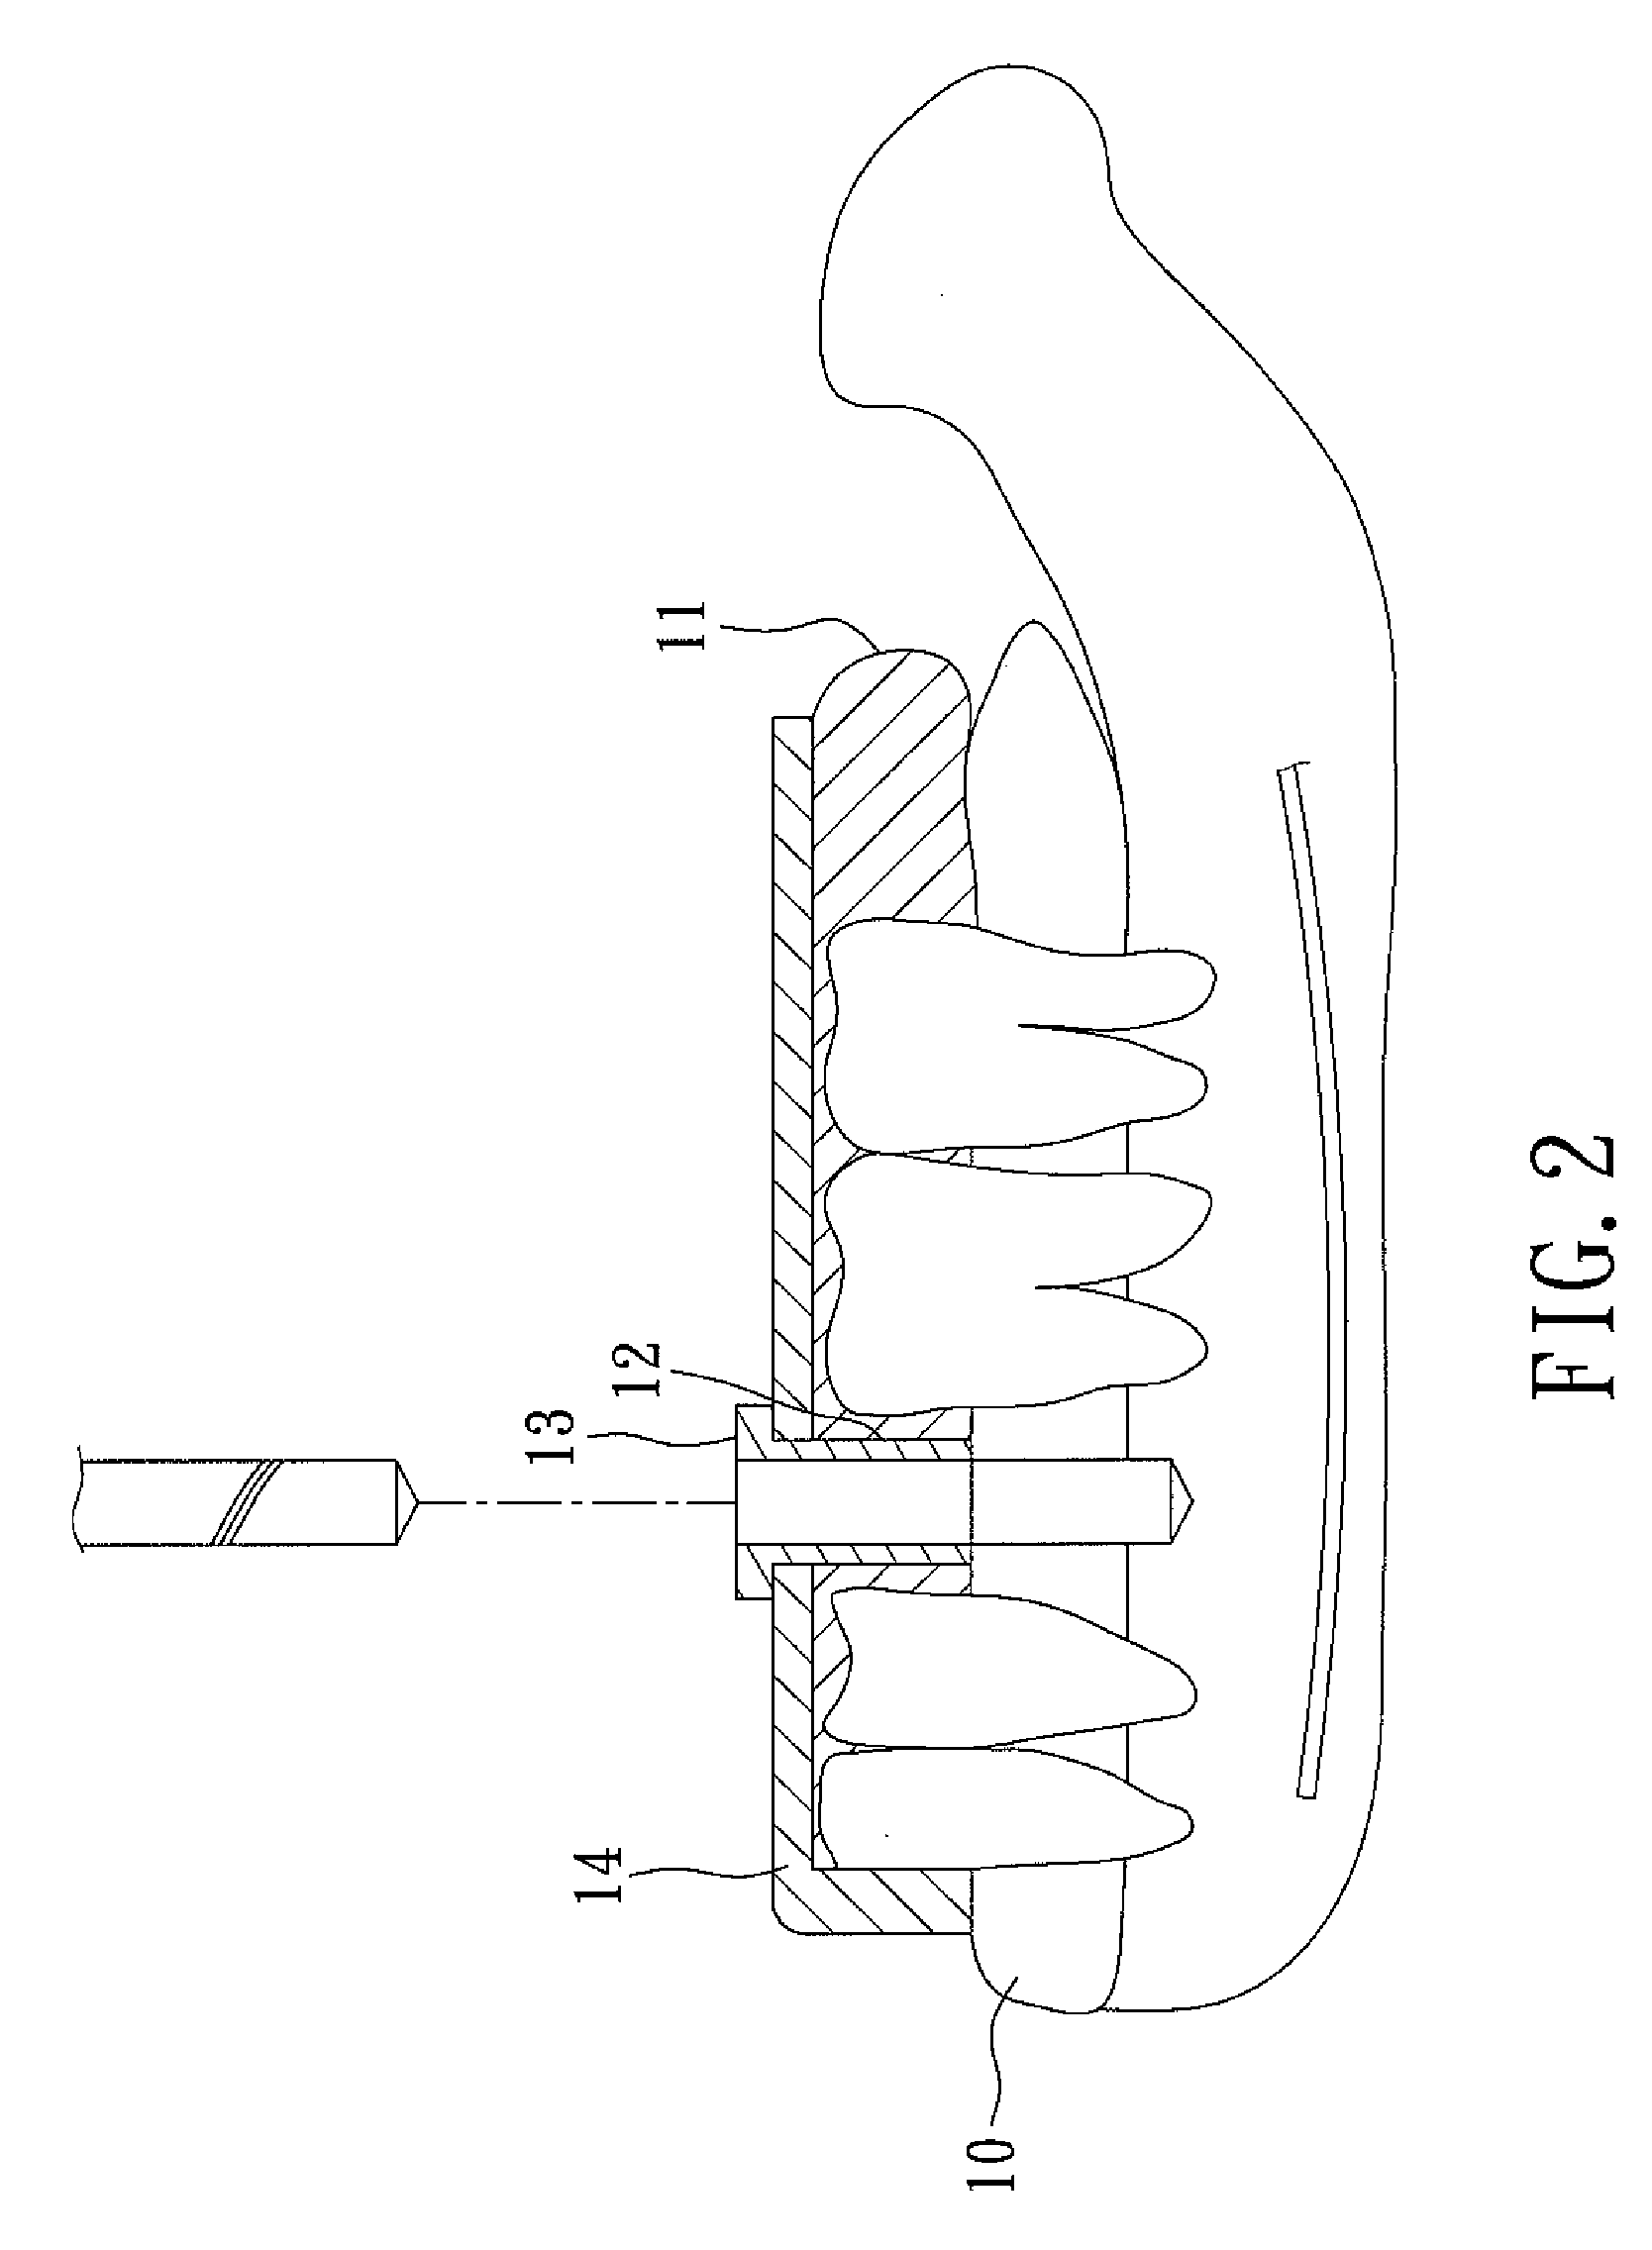 Method of making a surgical template used for a computer-guided dental implant surgery